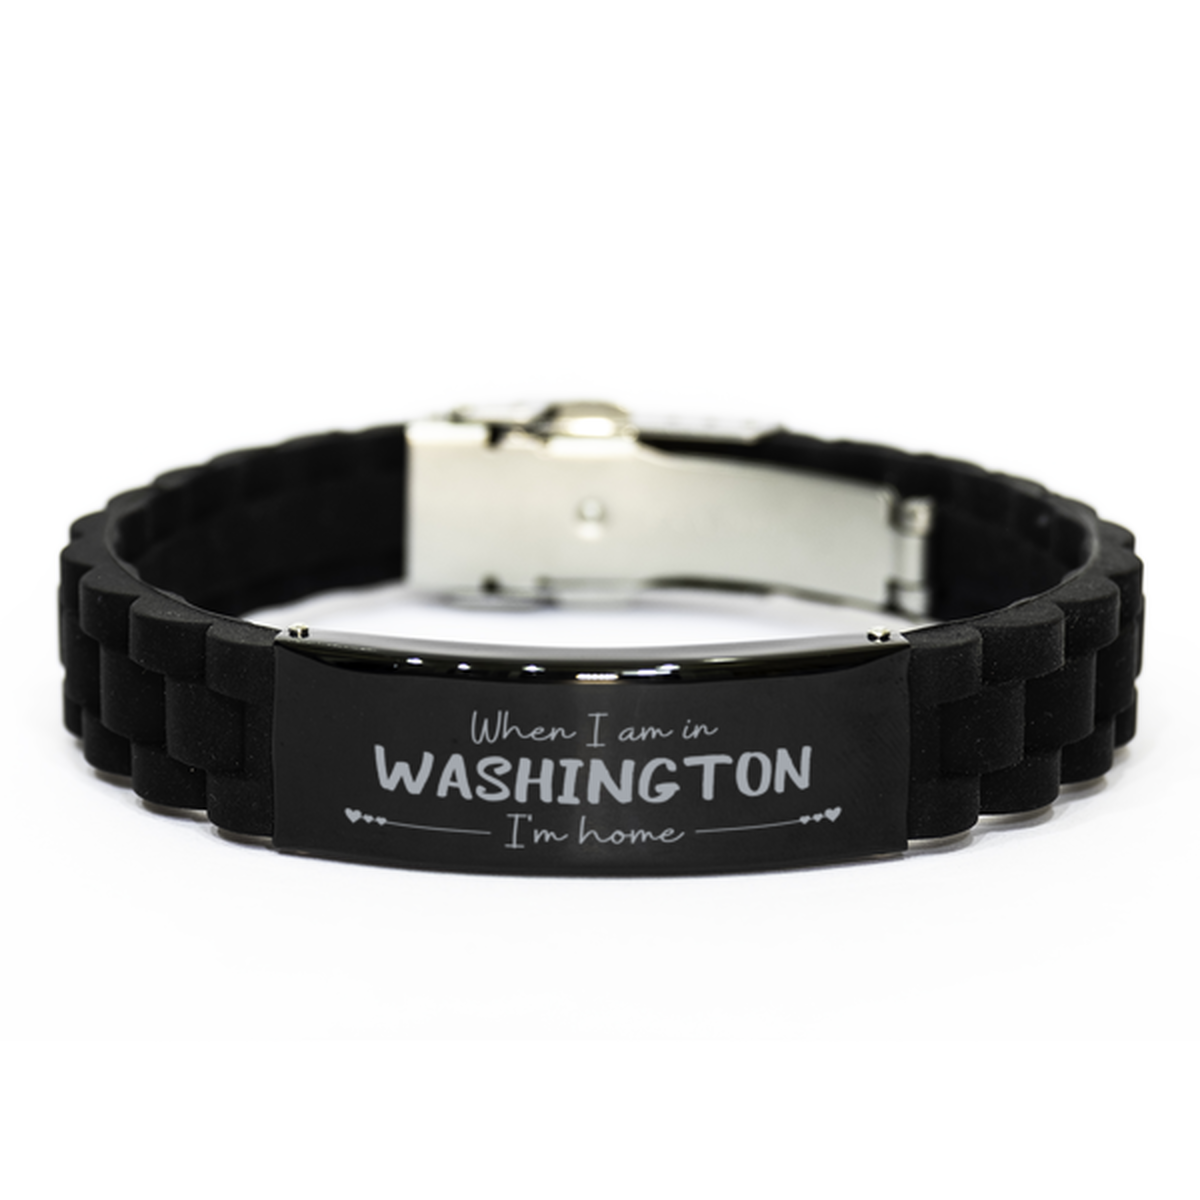 When I am in Washington I'm home Black Glidelock Clasp Bracelet, Cheap Gifts For Washington, State Washington Birthday Gifts for Friends Coworker